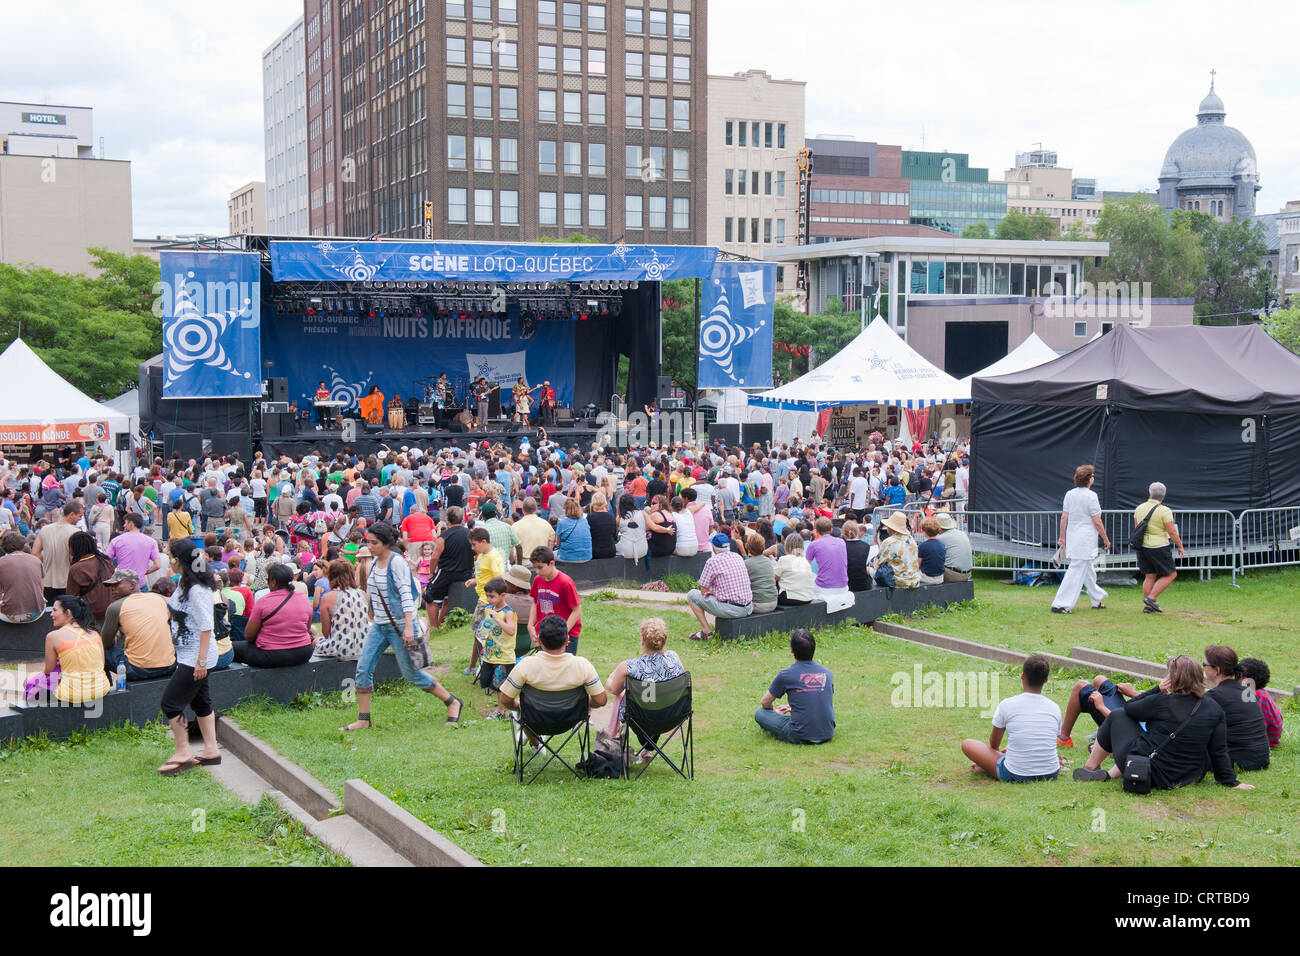 Crowd attending an outdoor concert given during the Nuits d'Afrique Festival in Montreal, province of Quebec, Canada. Stock Photo